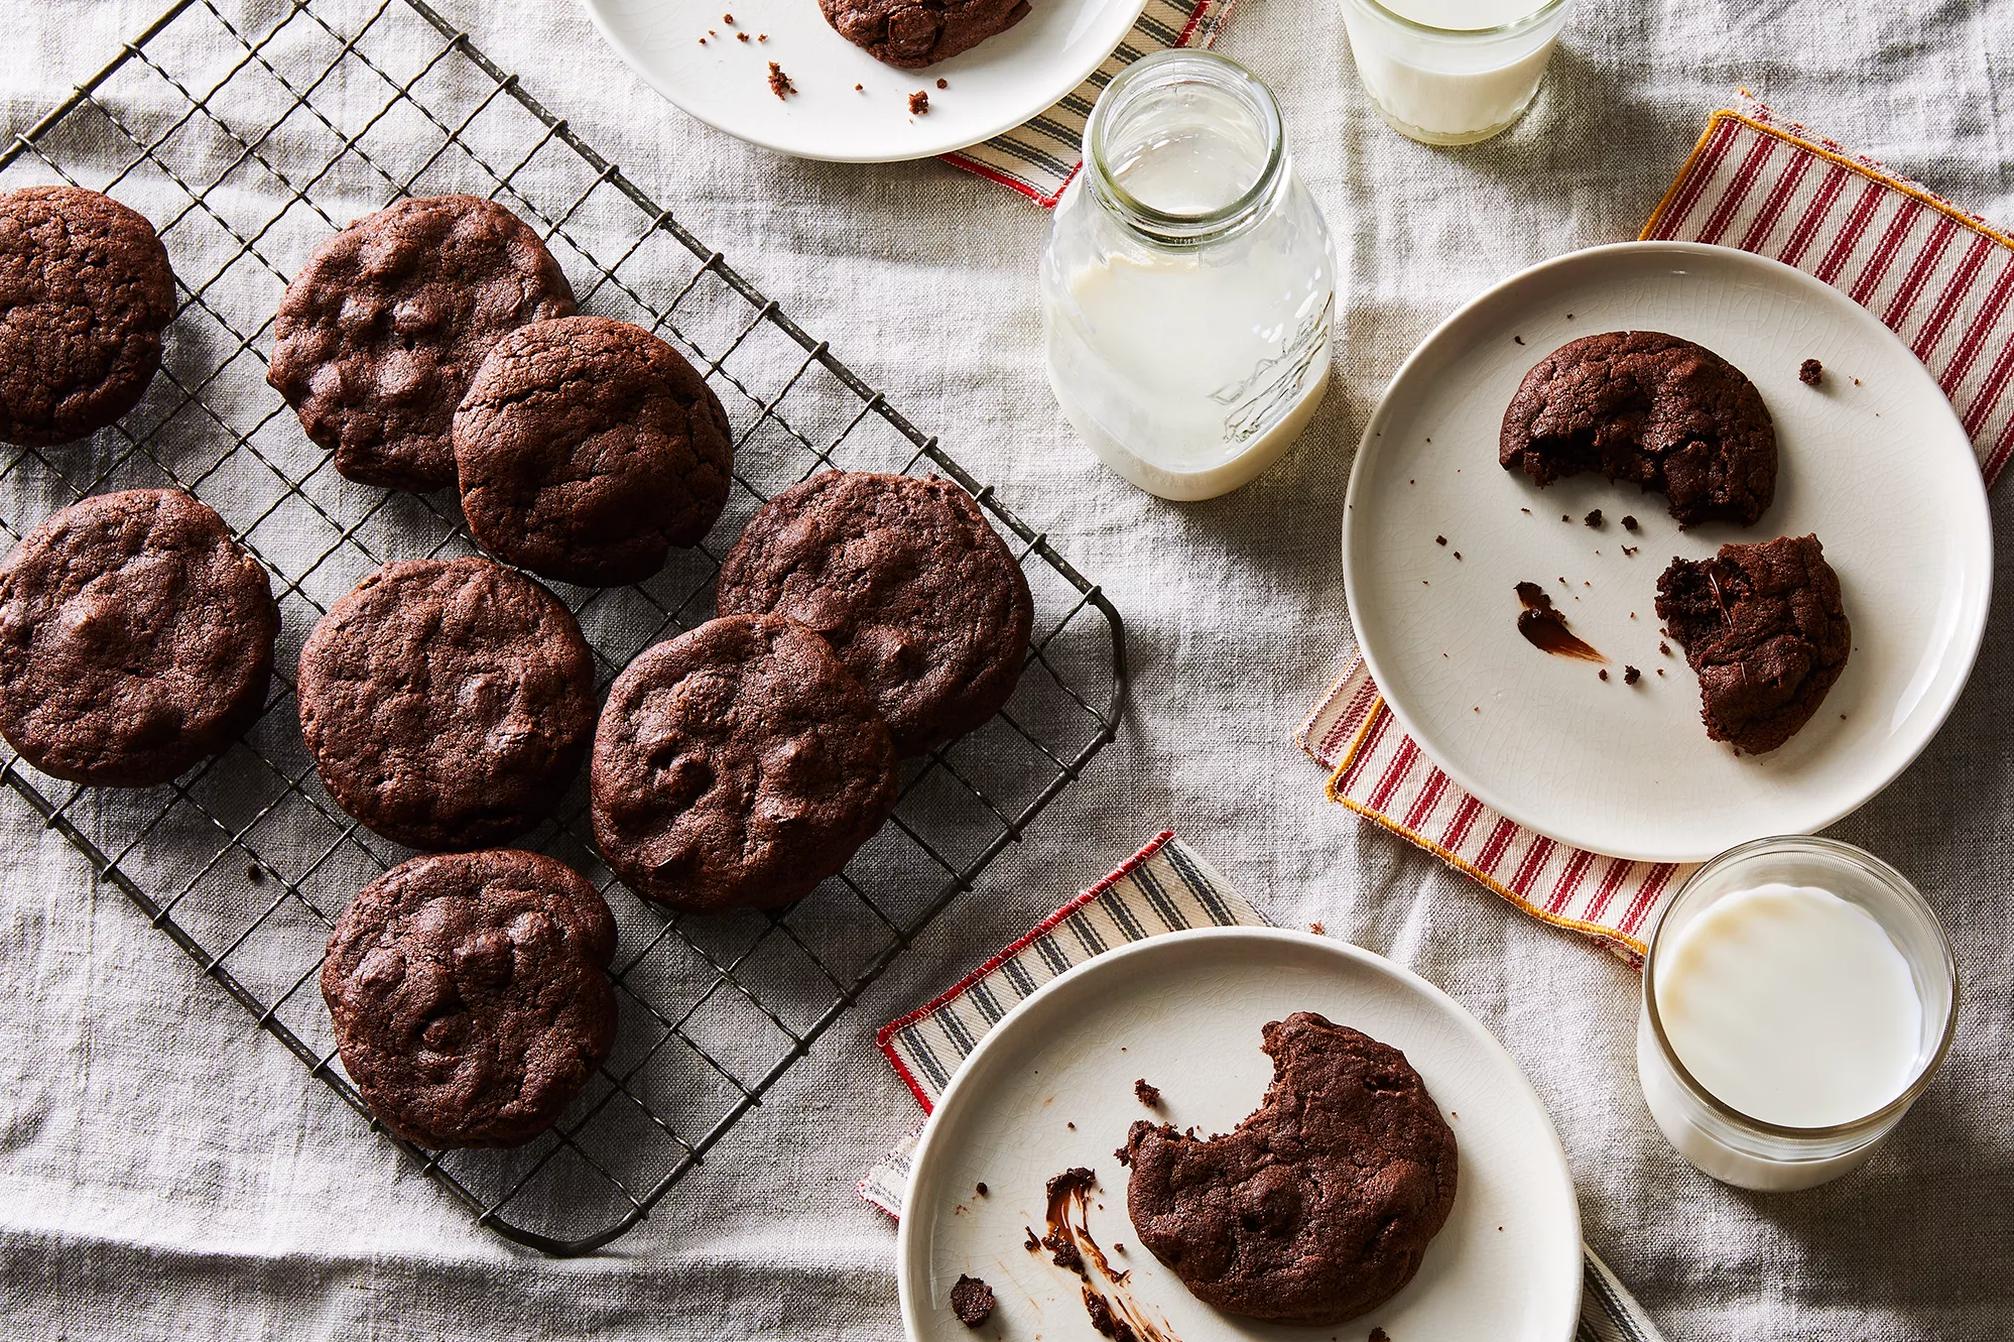  These cookies are so good, you won't want to share them.